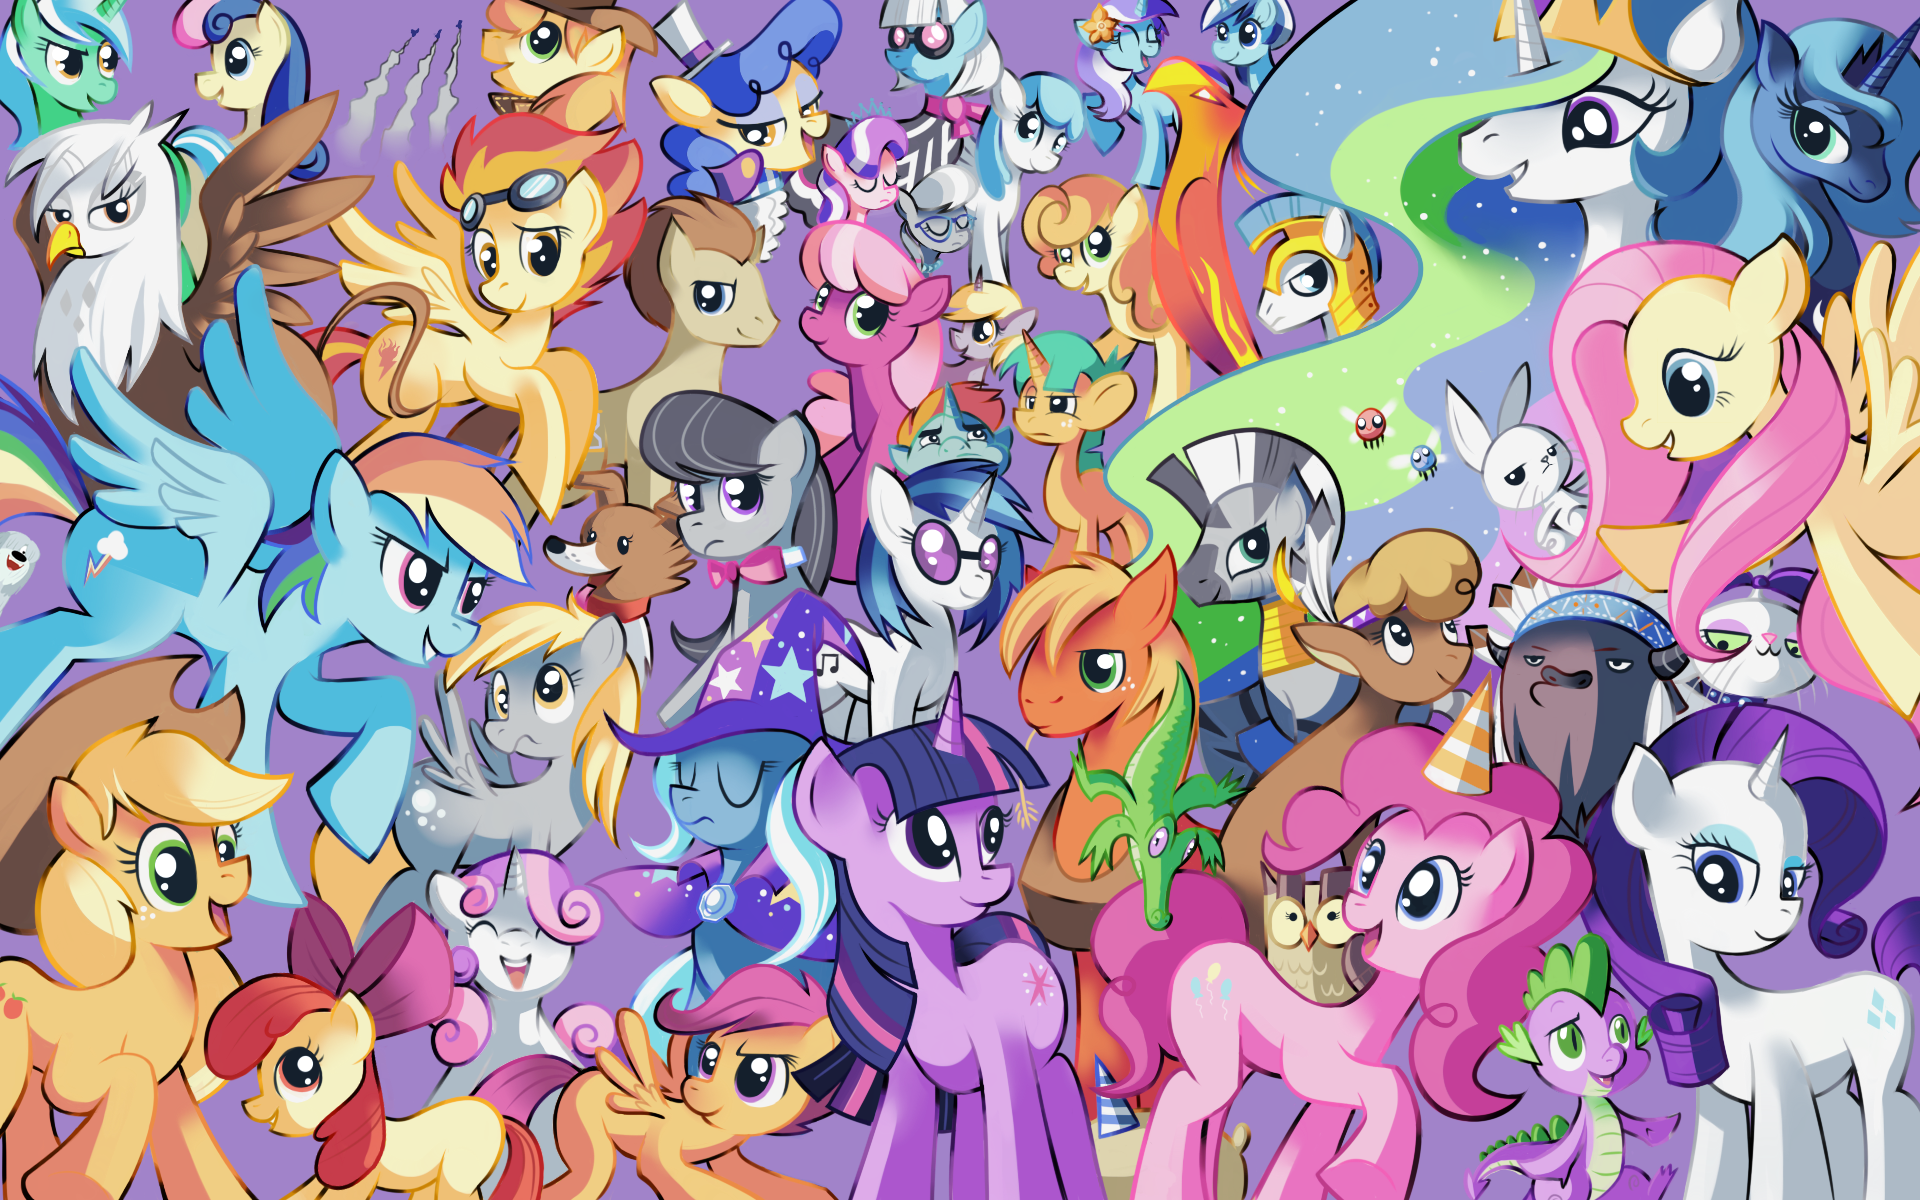 Free Download Little Pony Wallpapers My Little Pony Friendship Is Magic Wallpaper 19x10 For Your Desktop Mobile Tablet Explore 75 Pony Wallpaper Download My Little Pony Wallpaper Animated My